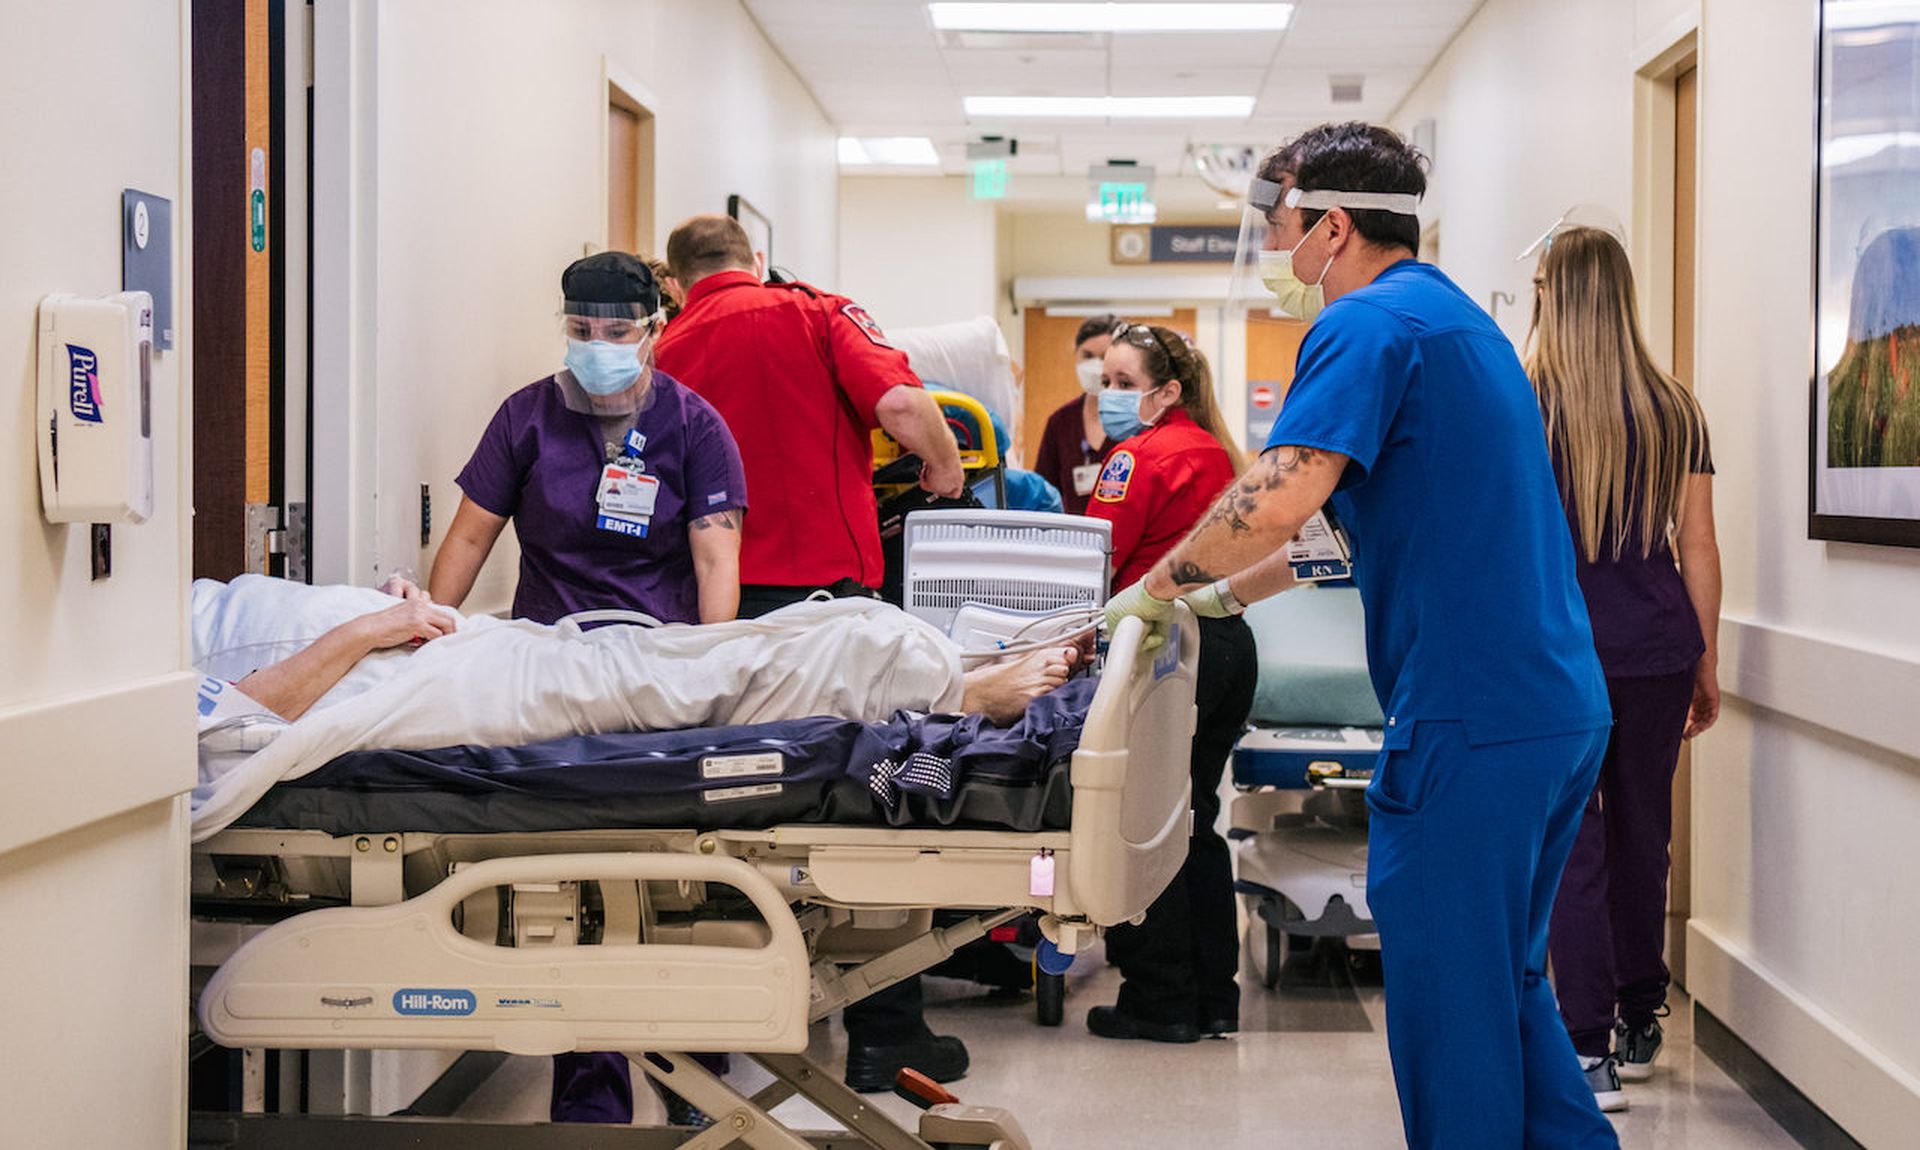 Emergency Room nurses and EMTs tend to patients in hallways at the Houston Methodist The Woodlands Hospital on August 18, 2021. A ransomware group dubbed by Mandiant as FIN12 tends to install Ryuk and focuses heavily on the health care sector.  (Photo by Brandon Bell/Getty Images)